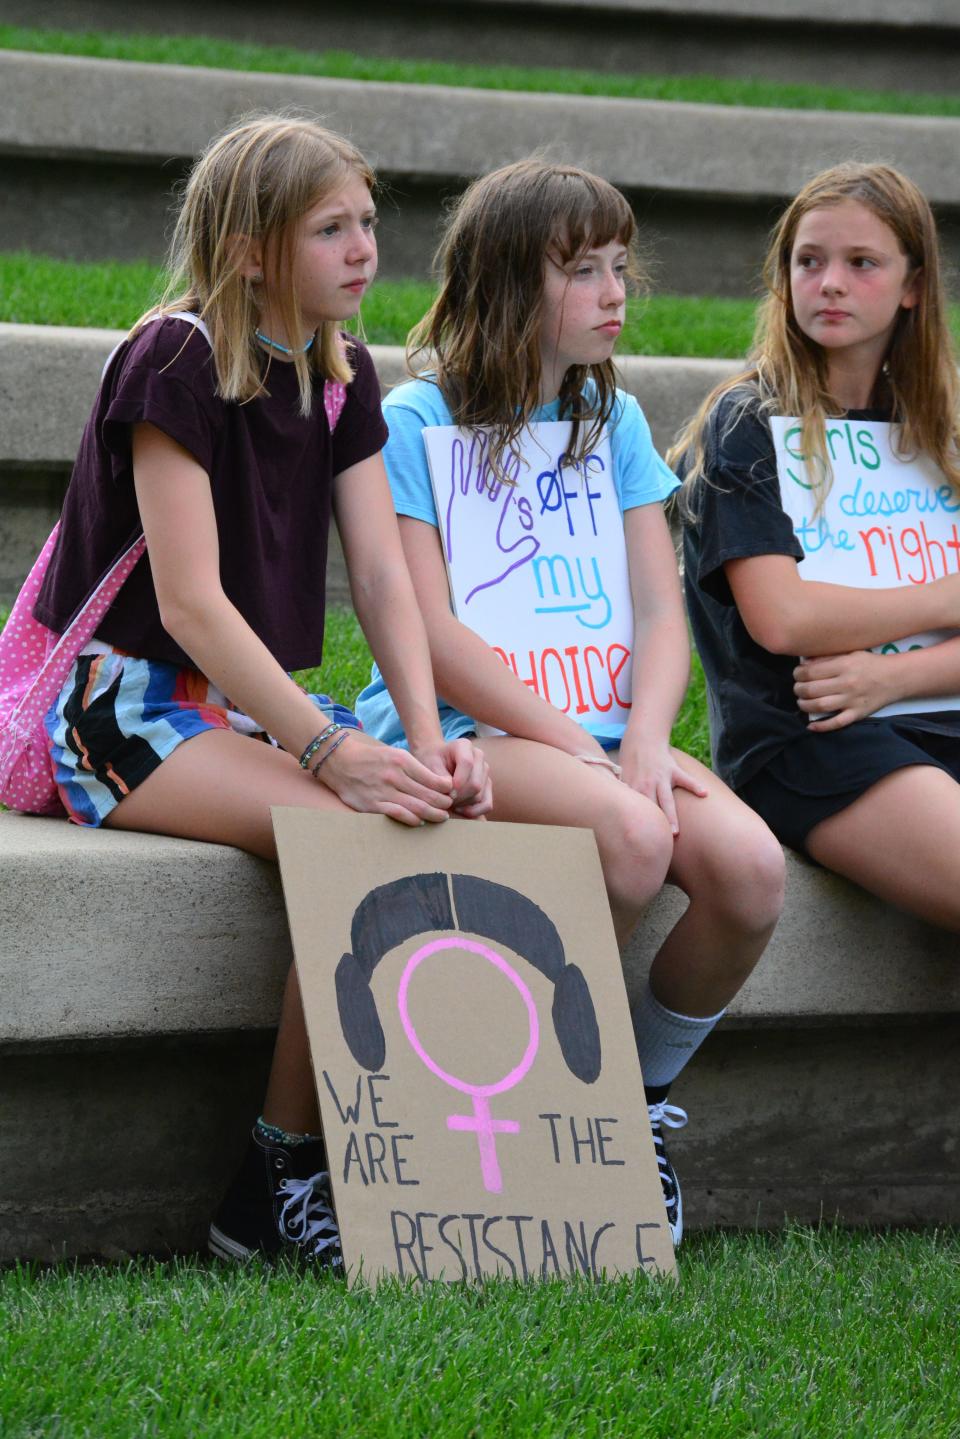 Ivy Blakey, 13, Brooklyn Alexander, 12, and Darcy Chegwidden, 12, listen to speakers and hold protest signs during an August abortion rights rally outside of the Boone County Courthouse.